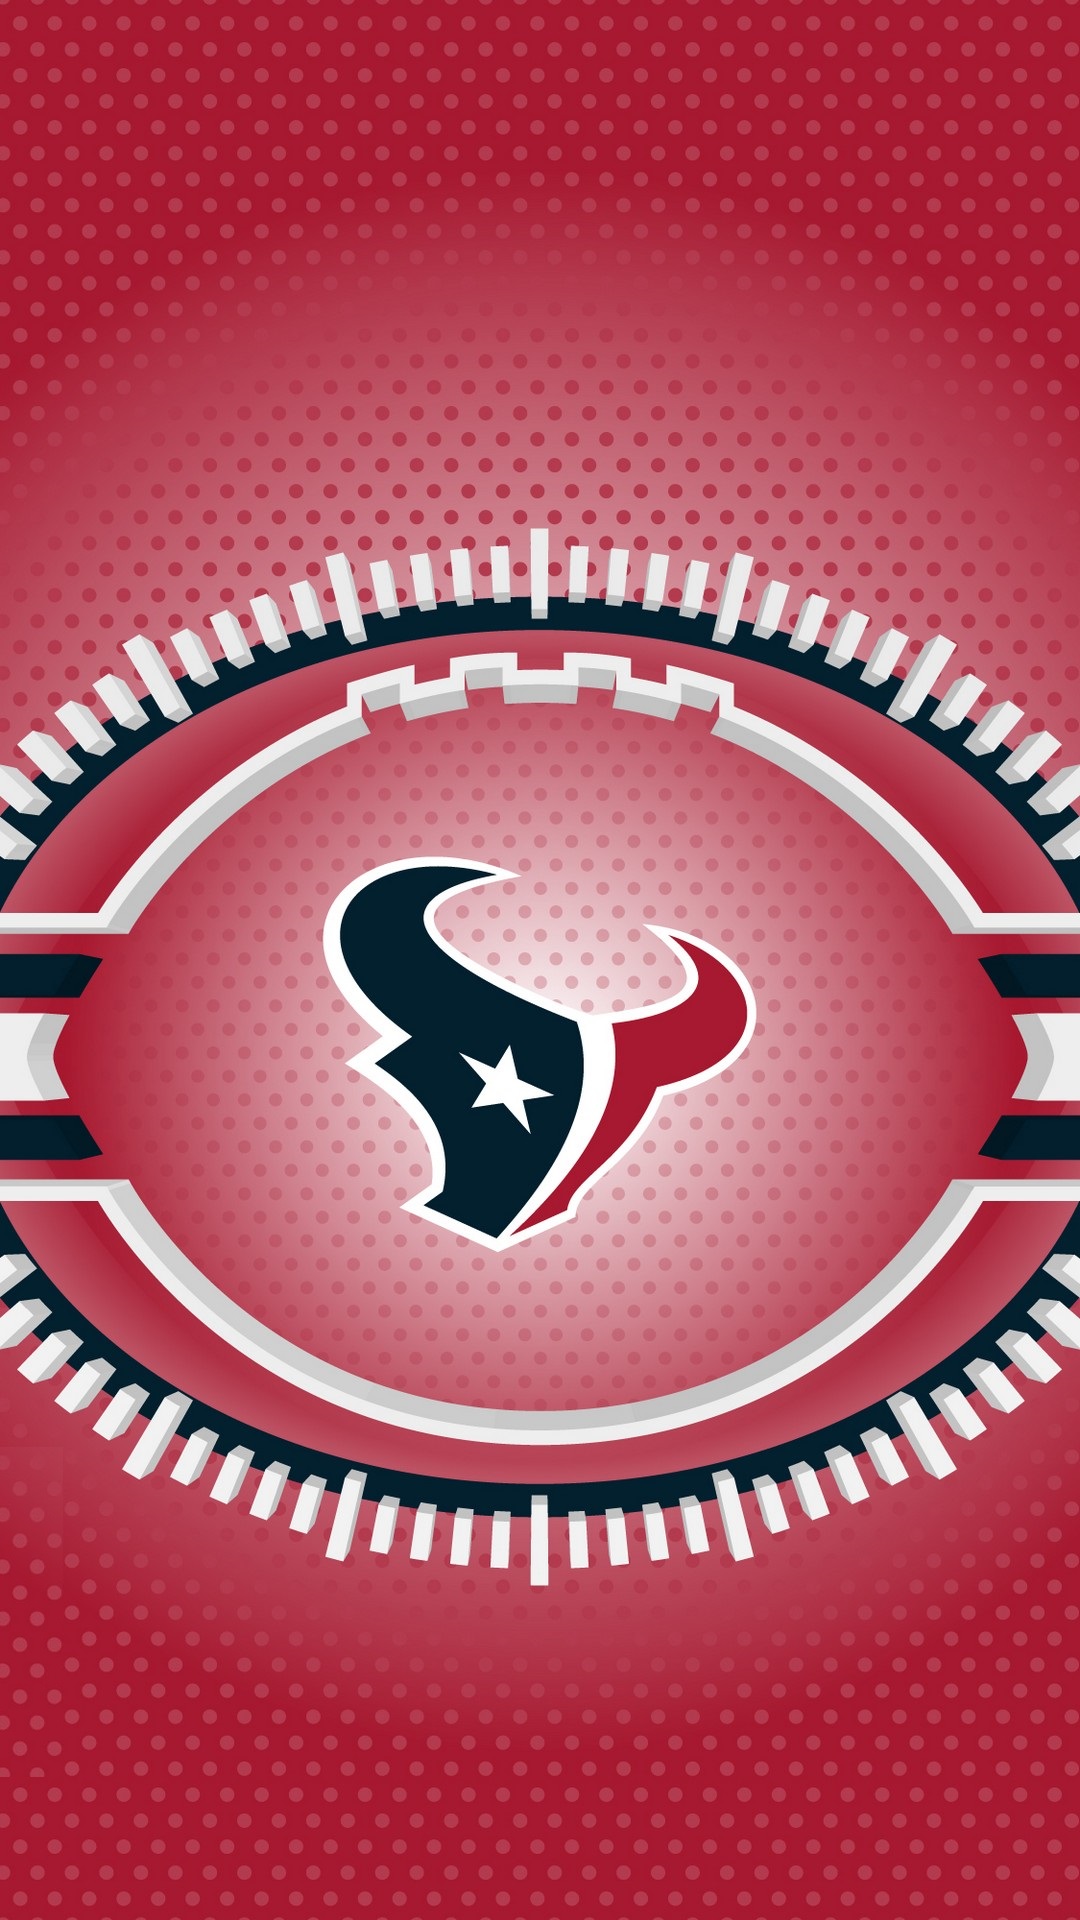 Houston Texans iPhone XS Wallpaper with high-resolution 1080x1920 pixel. Download and set as wallpaper for Apple iPhone X, XS Max, XR, 8, 7, 6, SE, iPad, Android